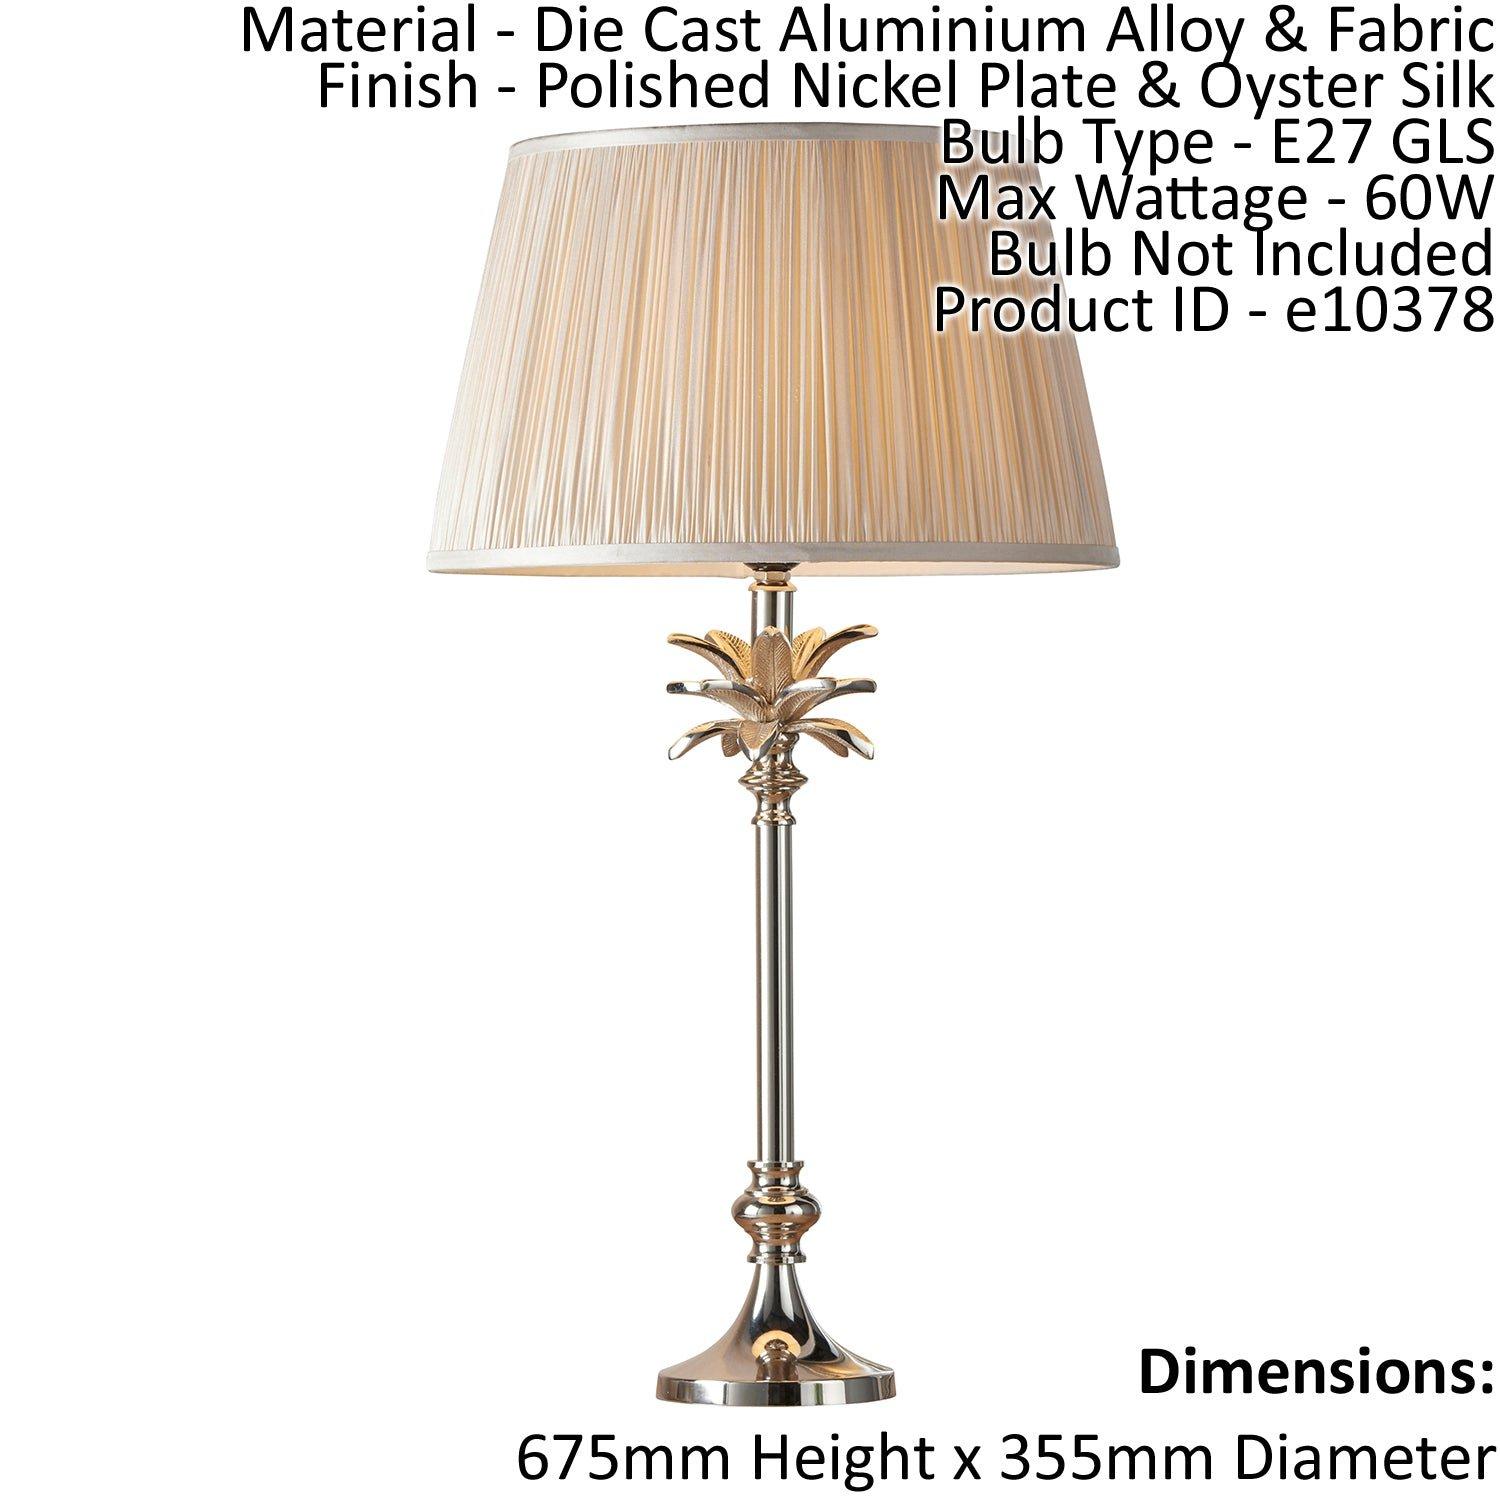 Table Lamp Polished Nickel Plate & Oyster Silk 60W E27 Base & Shade e10378